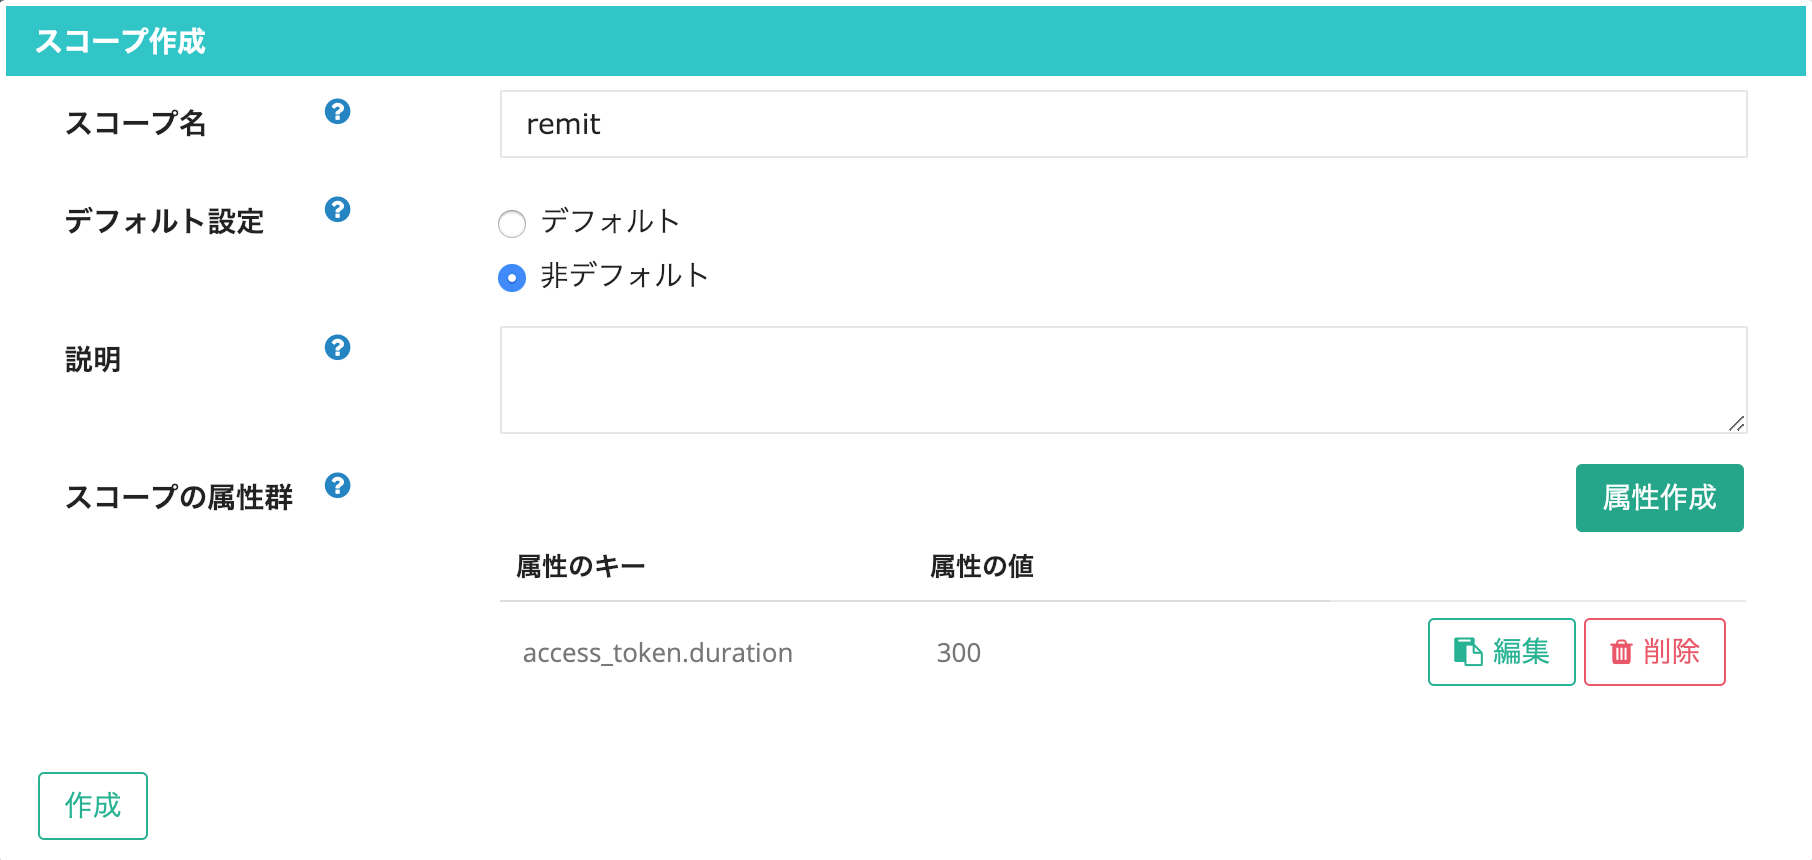 access_token_duration.png